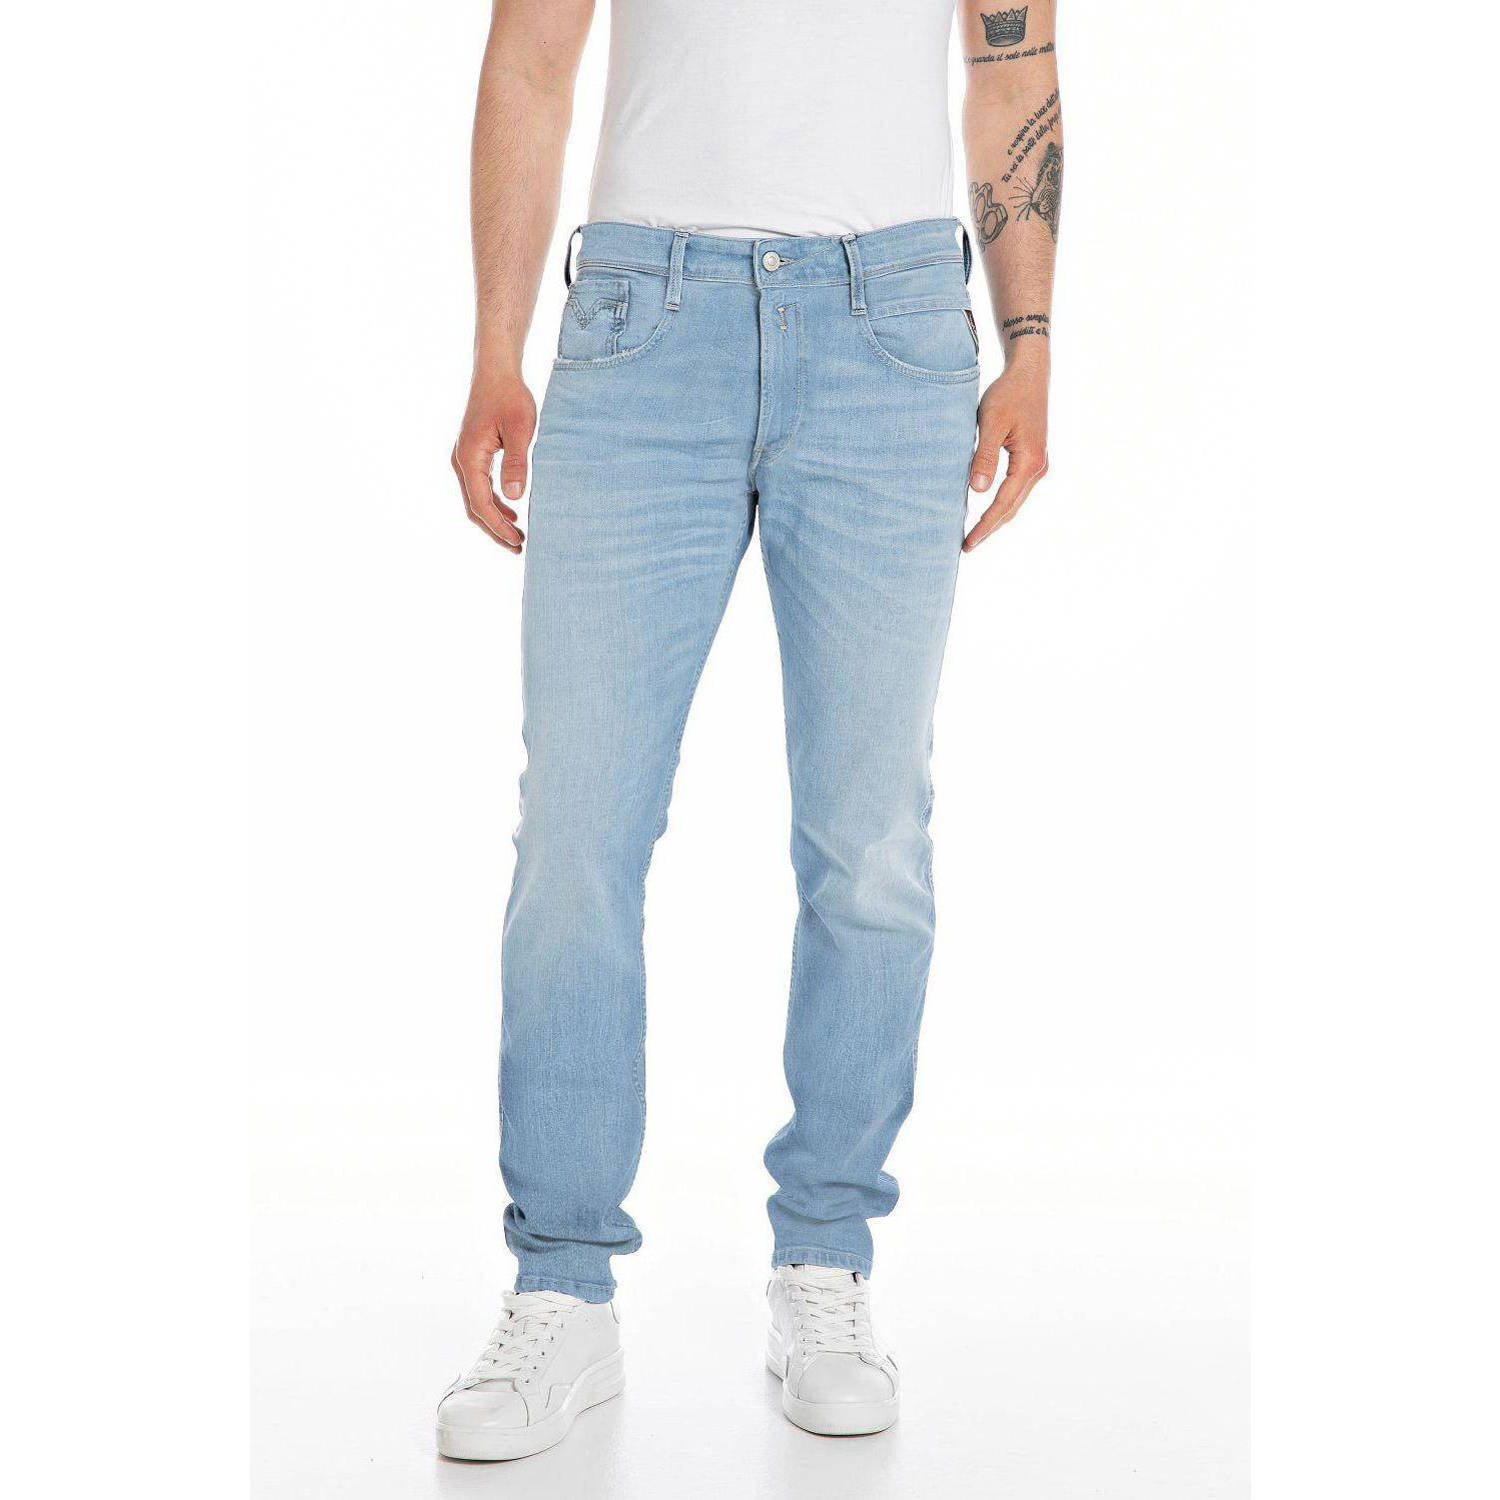 REPLAY slim fit jeans ANBASS light blue